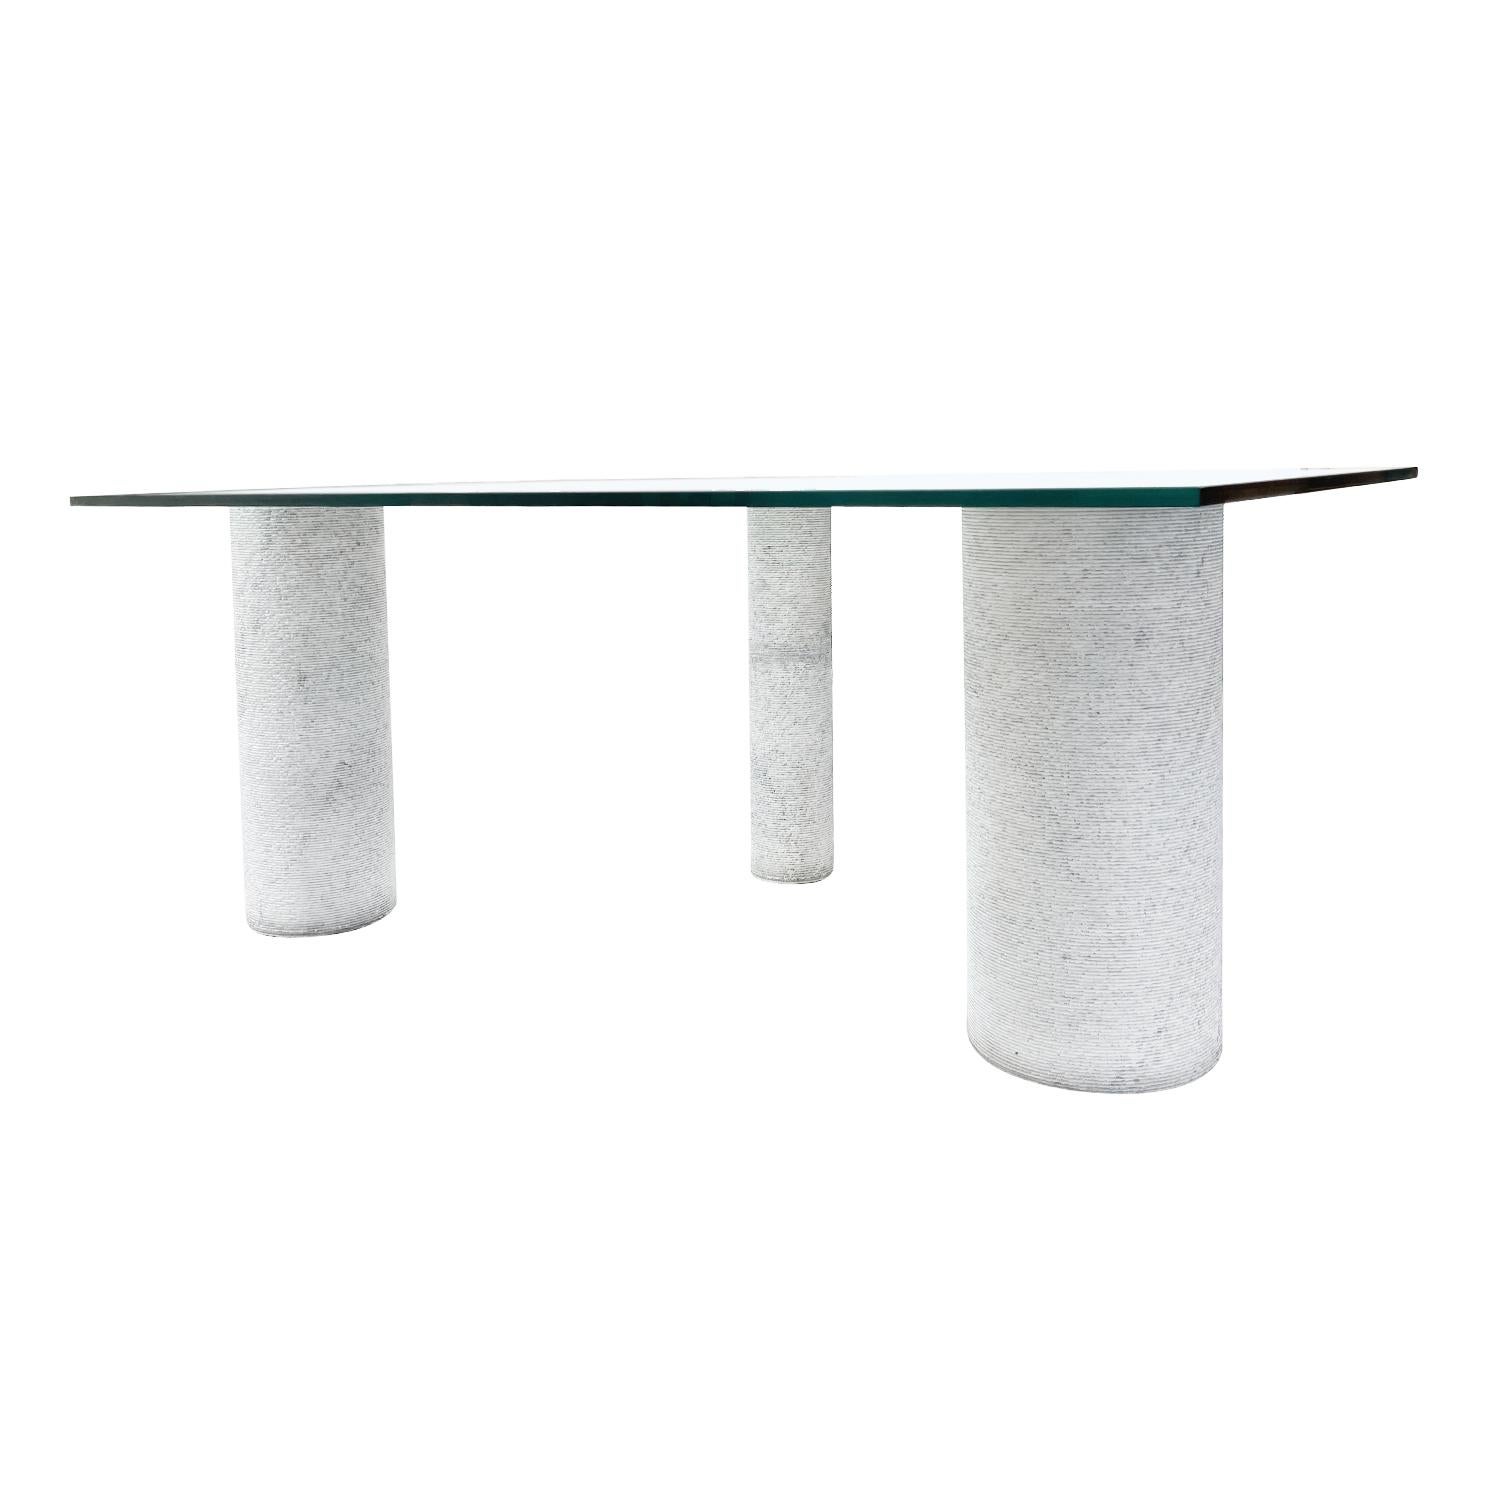 Hand-Crafted 20th Century White Italian Marble, Glass Dining Room Table by Massimo Vignelli For Sale